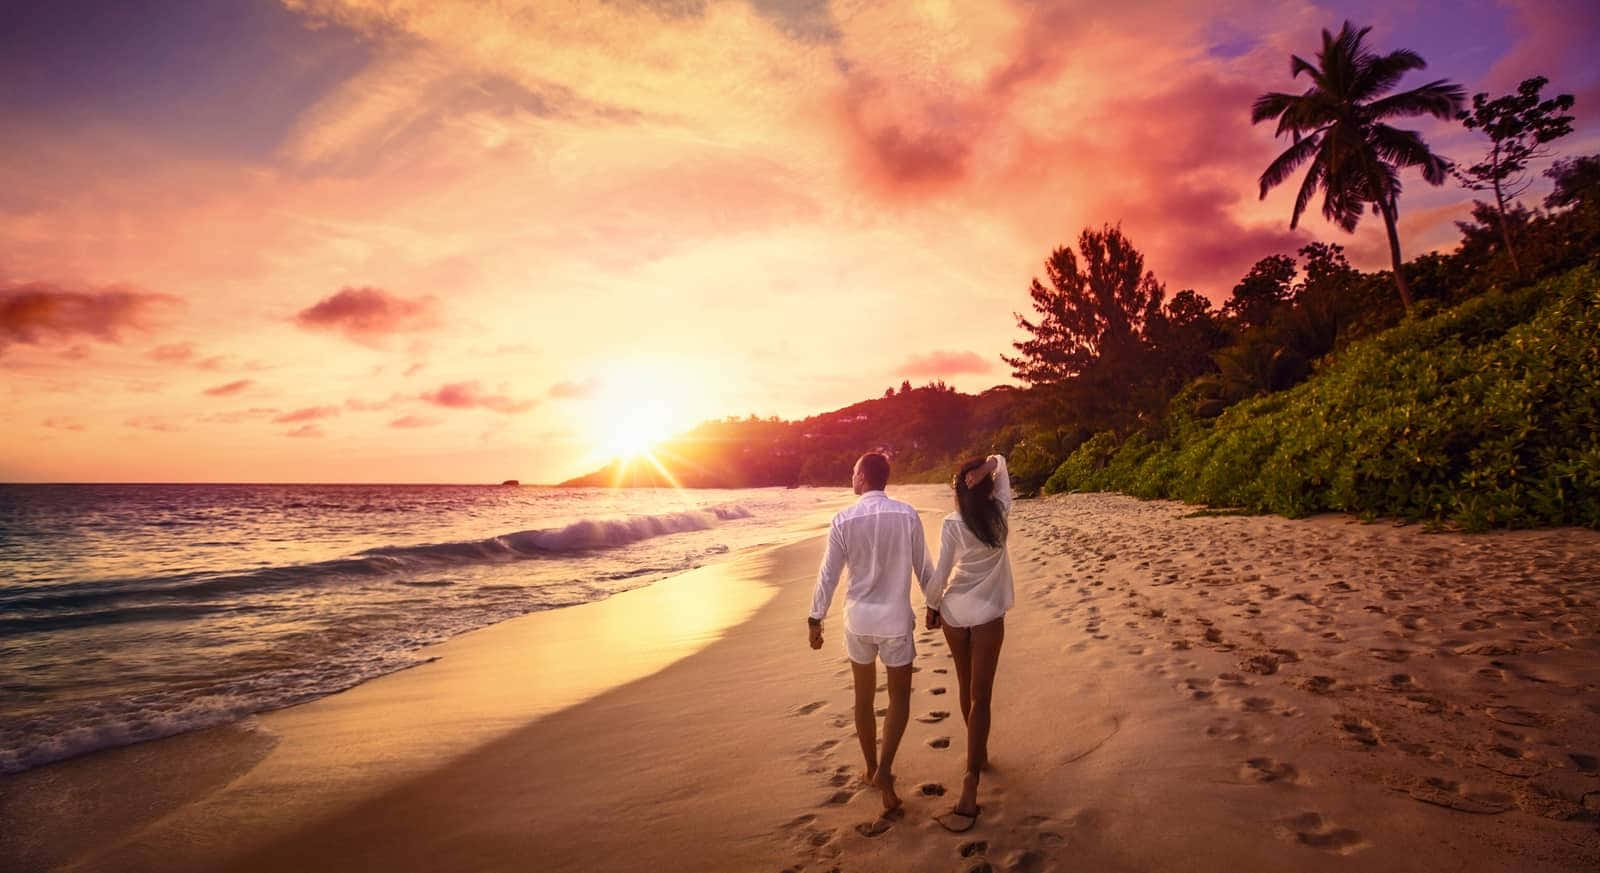 Couple At Beach Walking Near Palm Trees At Sunset Picture